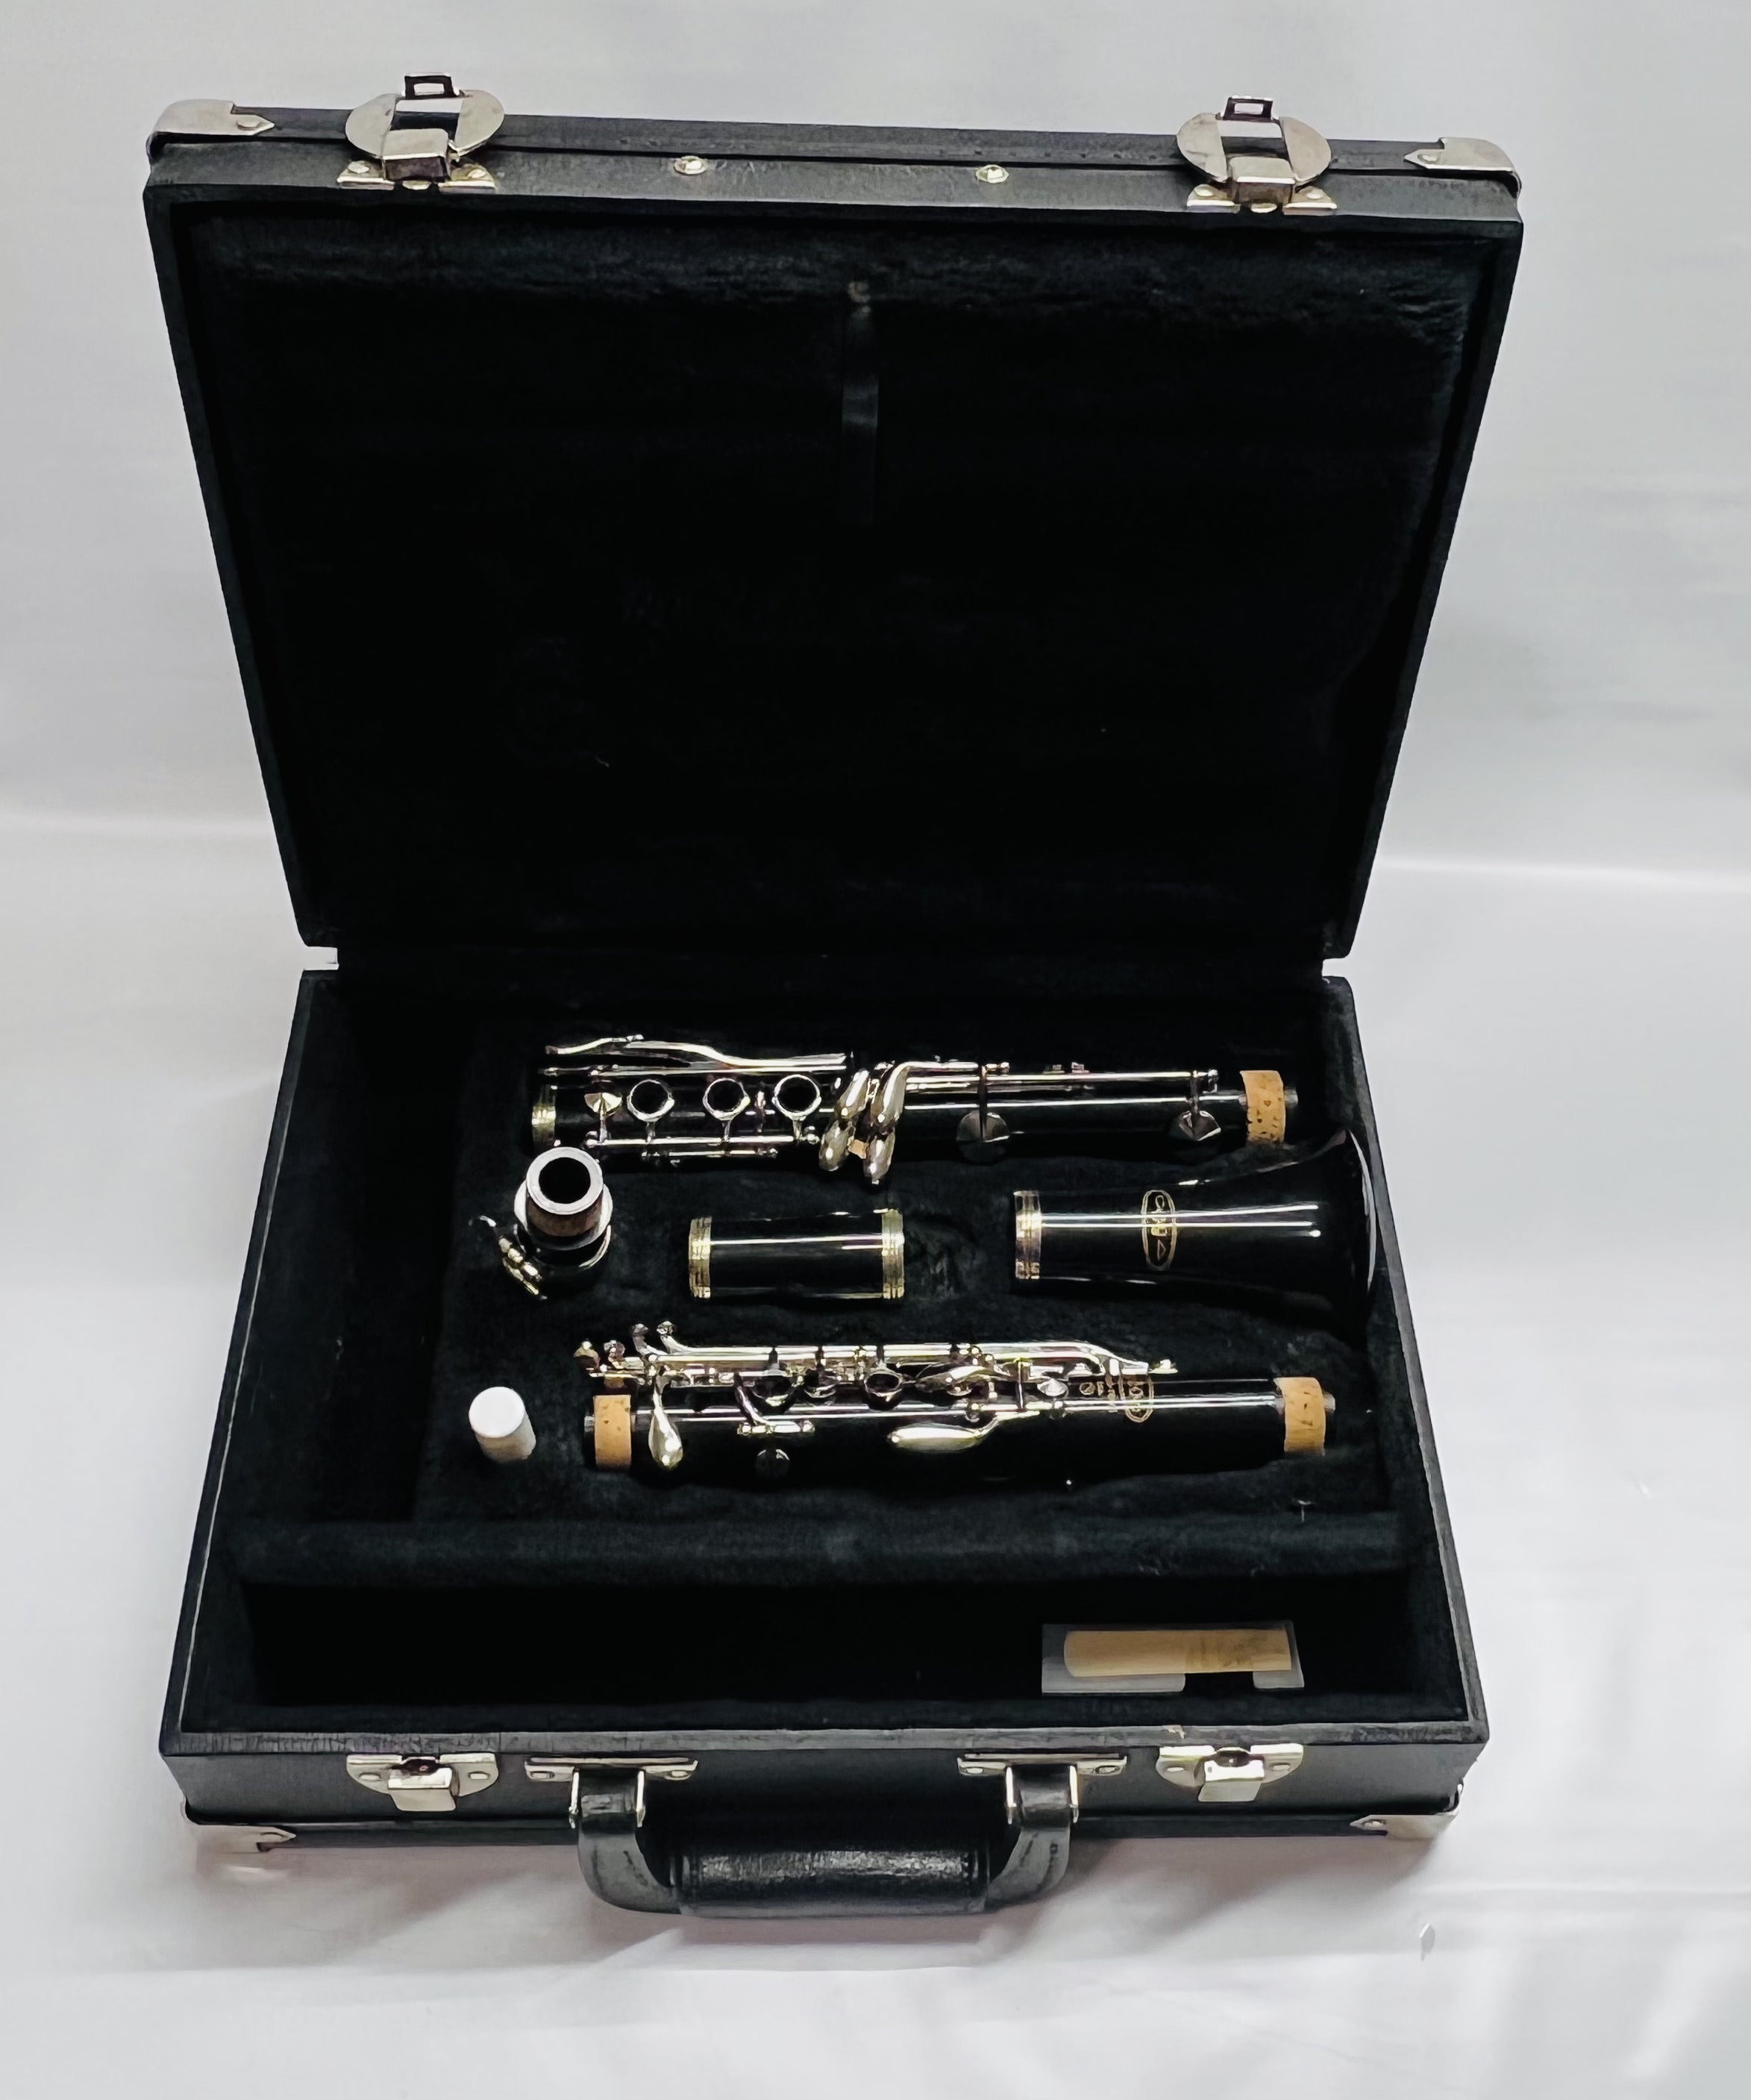 VITO 7214 Clarinet Plastic Body Wood Case Full Rebuild All New Pads USED